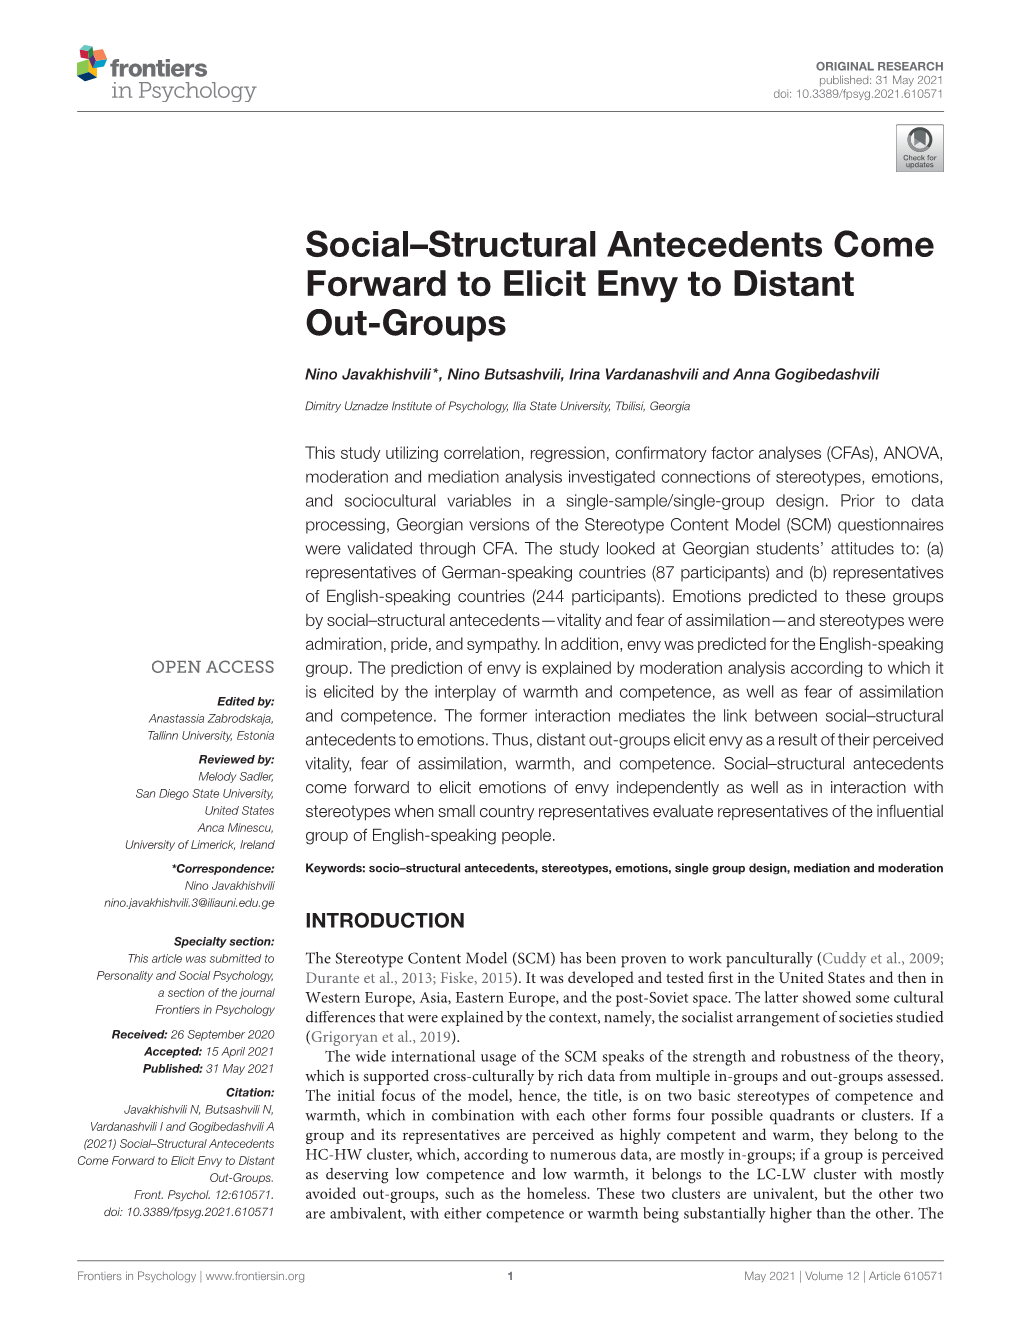 Social–Structural Antecedents Come Forward to Elicit Envy to Distant Out-Groups